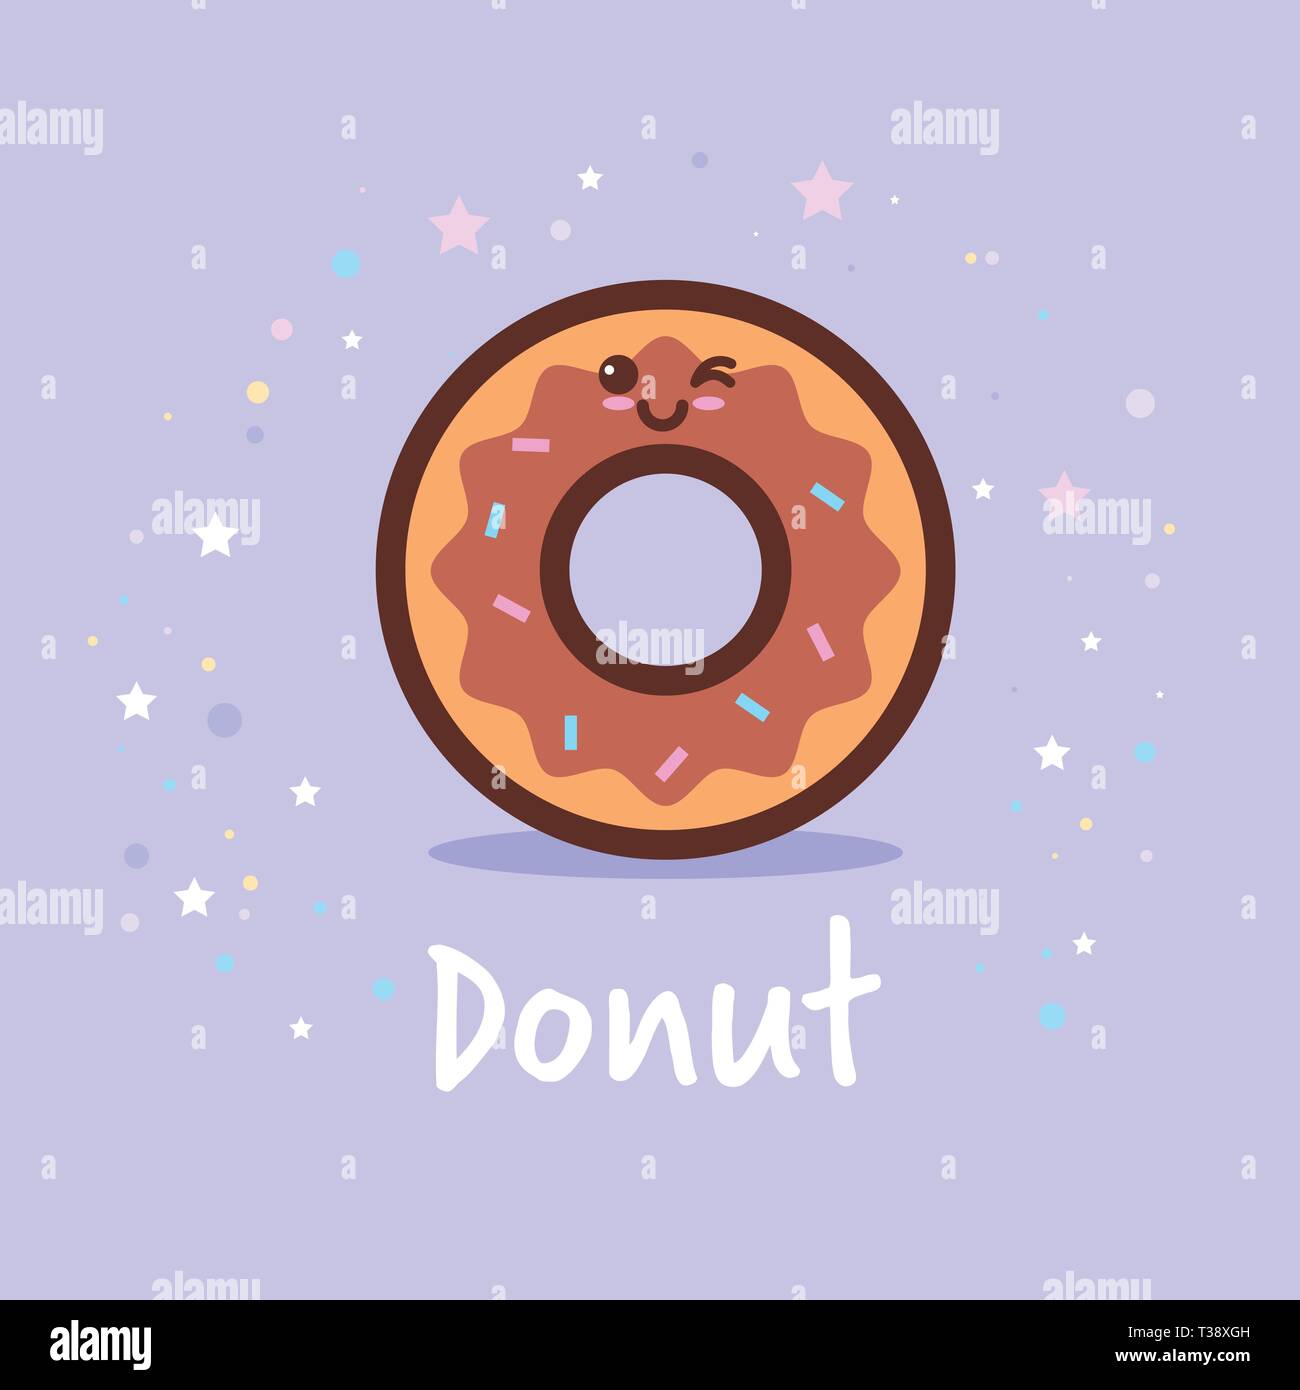 cute donut cartoon comic character with smiling face happy emoji kawaii style sweet freshly baked cookie dessert food concept vector illustration Stock Vector